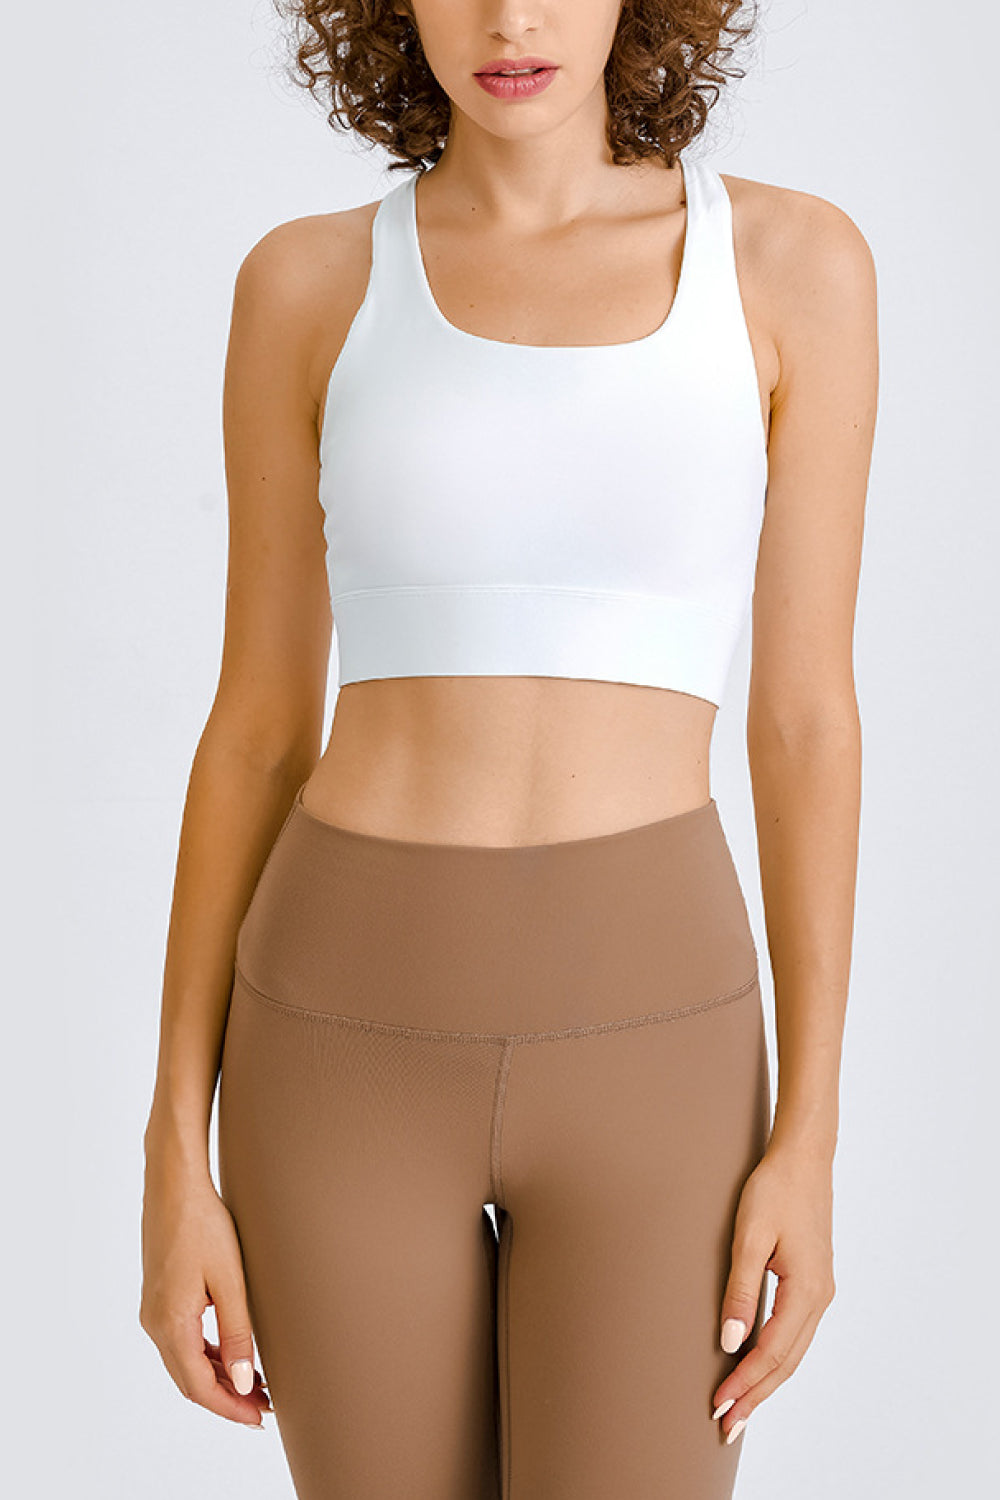 Form Fitting Yoga Bra with Cross Back